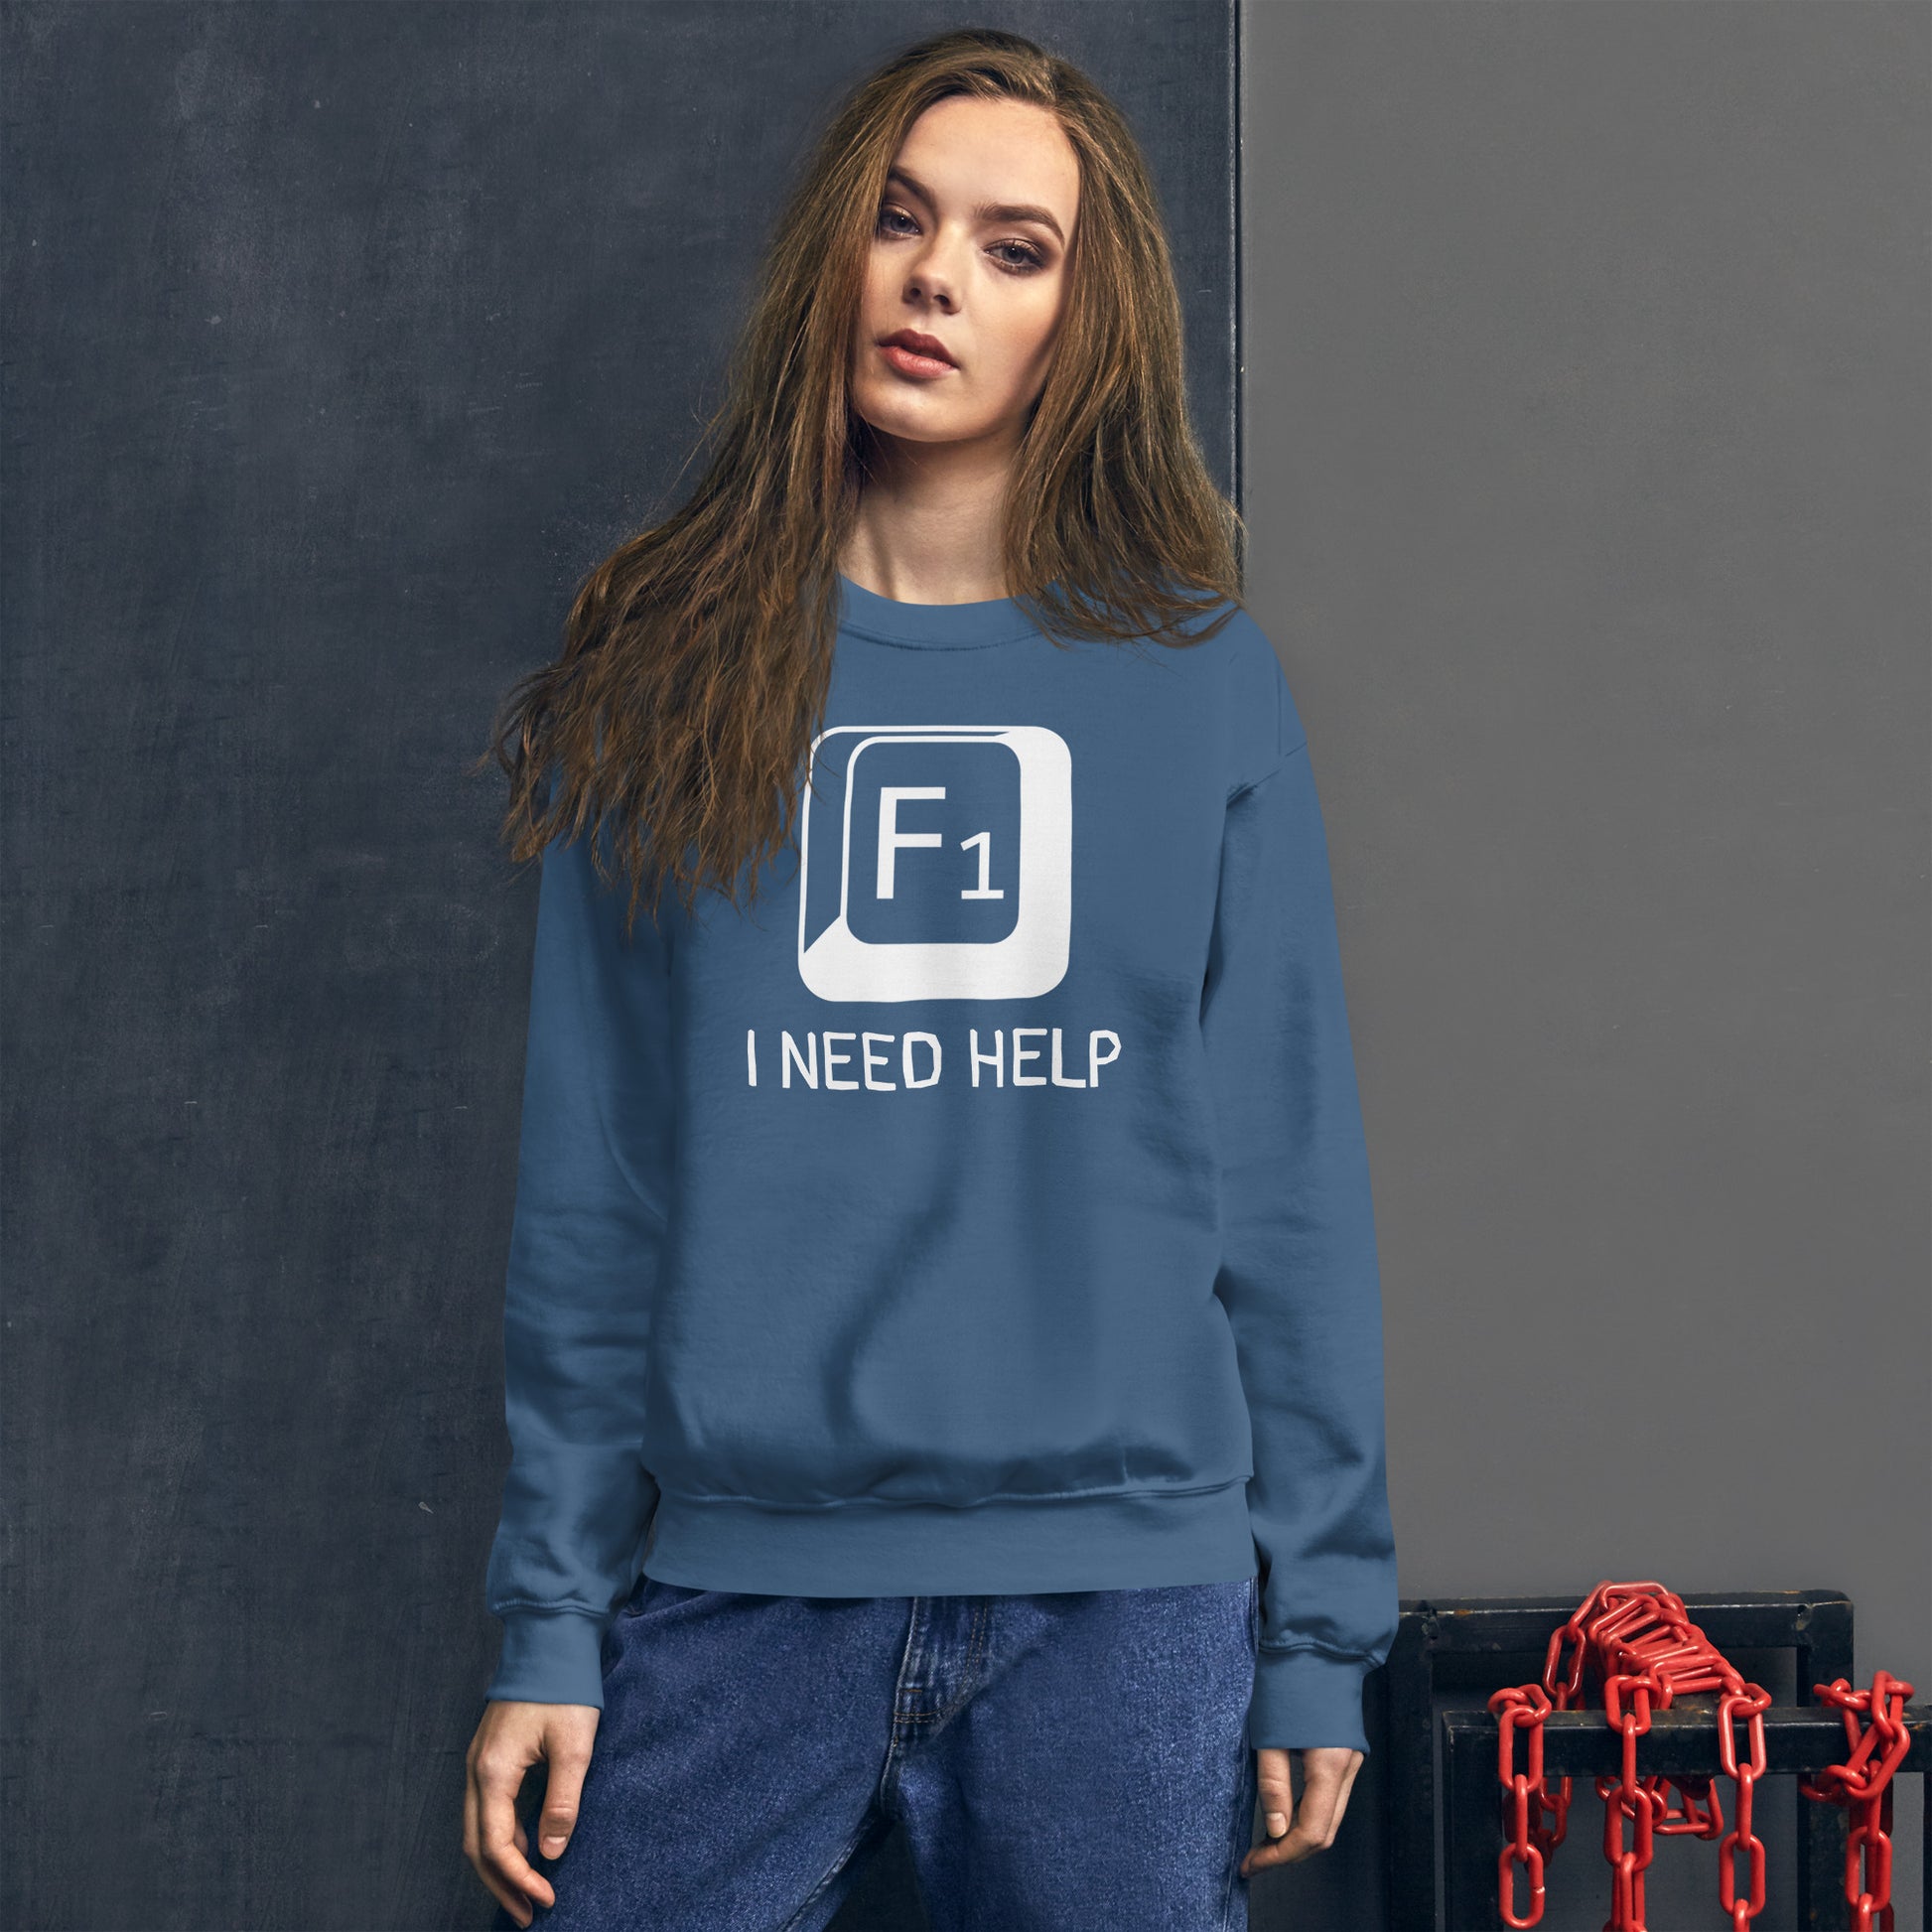 Women with indigo blue sweatshirt and a picture of F1 key with text "I need help"